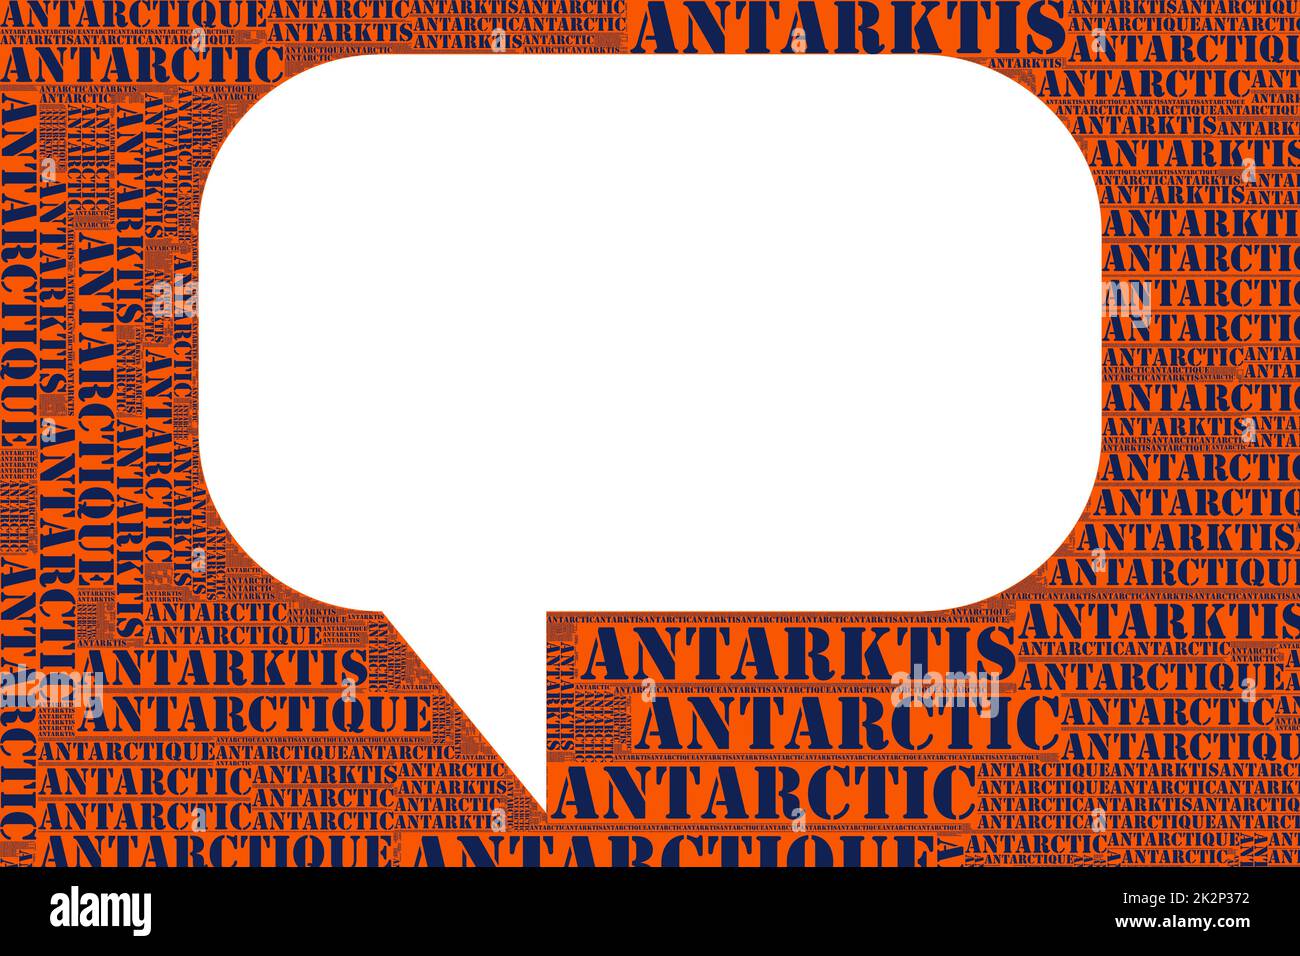 The Words 'Antarktis, Antarctic, Antarctique, ' as Word Art, Word Cloud, Tag Cloud in Different Languages with Copy Space. Stock Photo